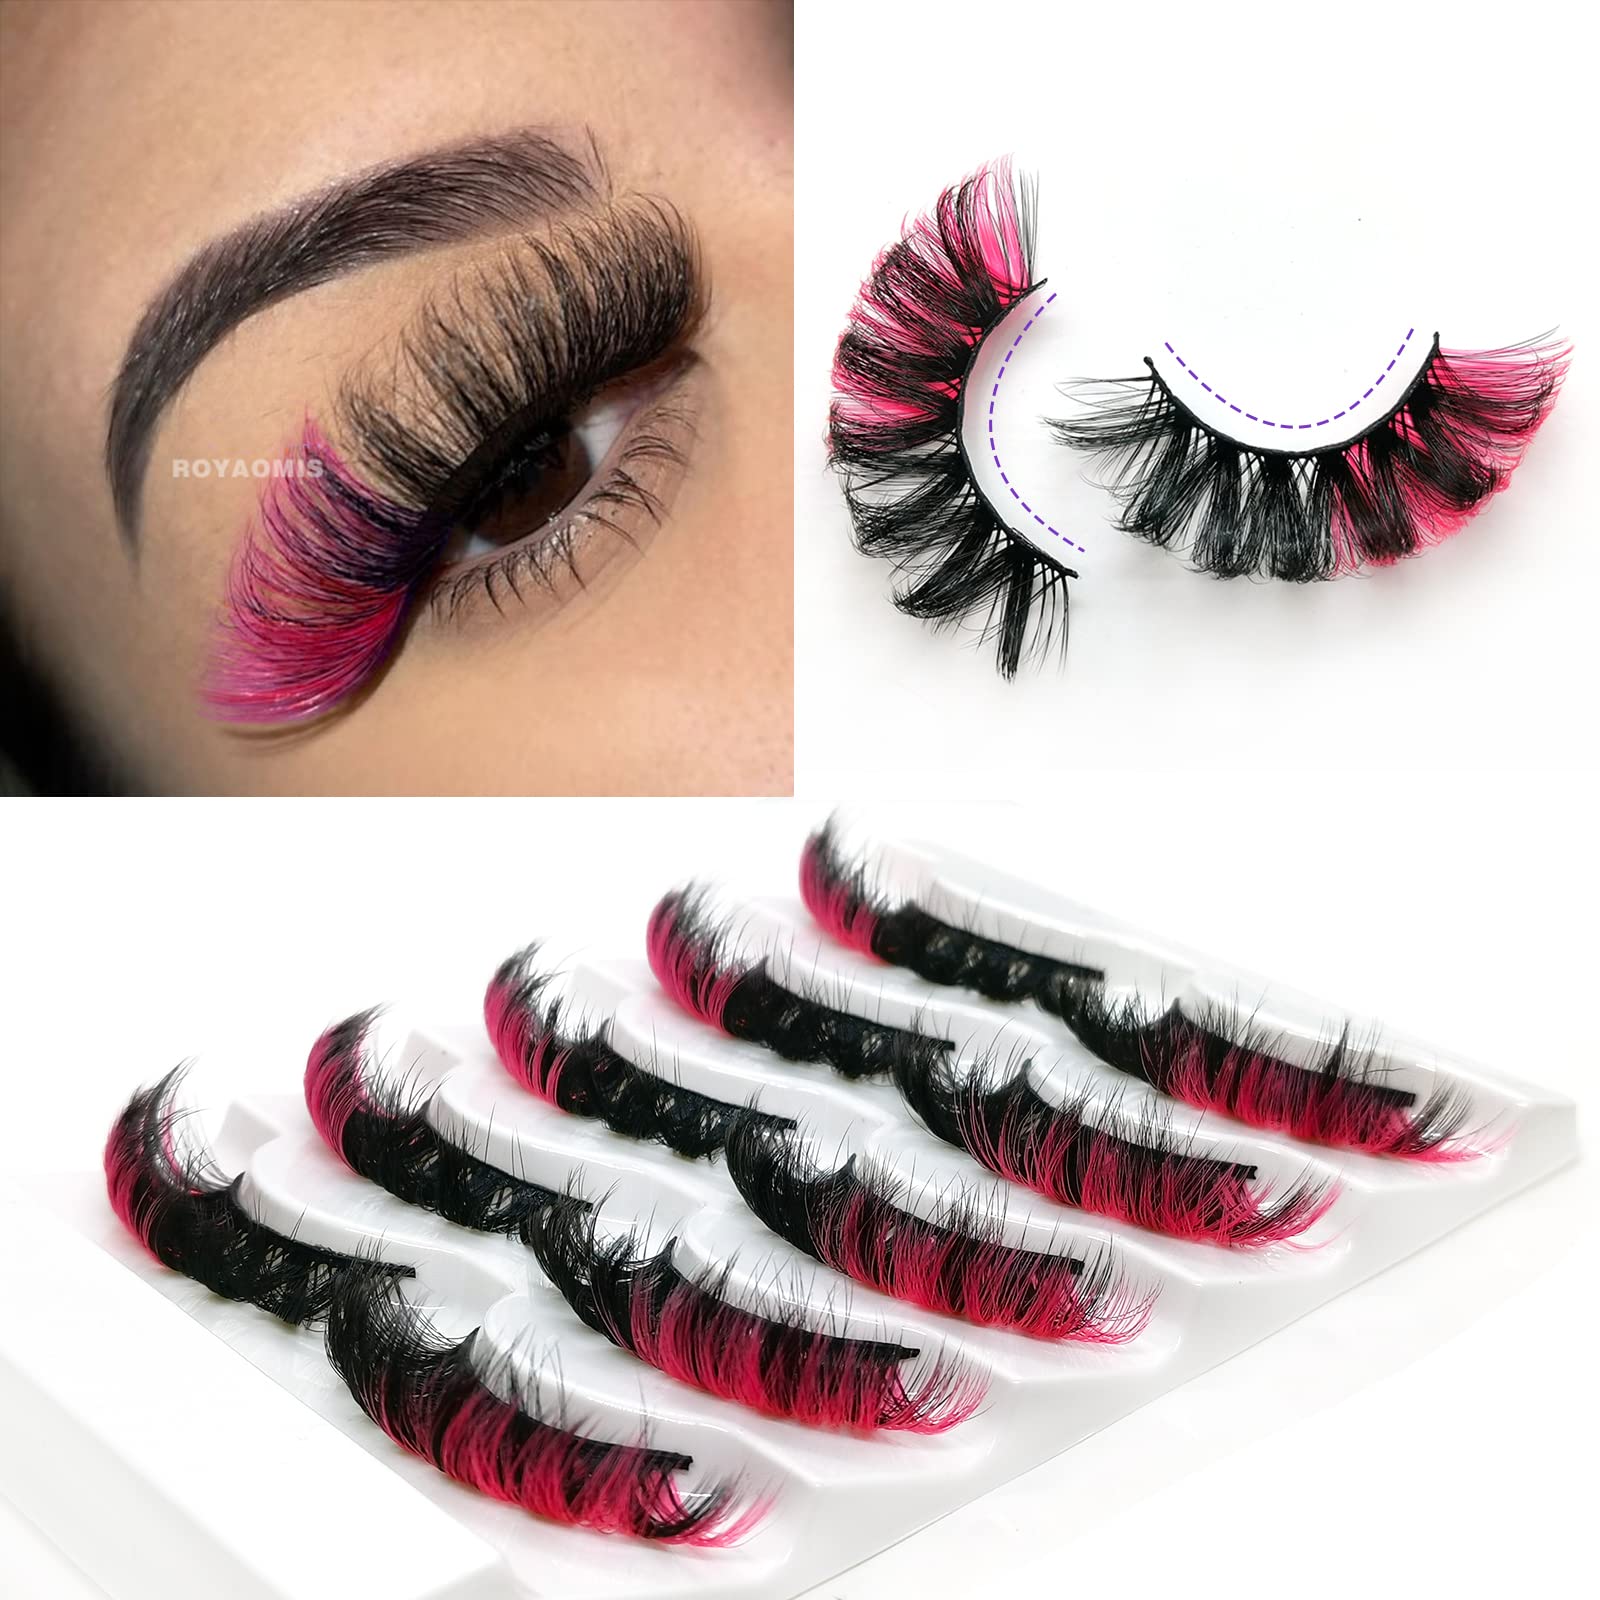 Royaomis 3d Colored Russian Strip Lashes, 20mm D Curl Lash Strips, Fluffy Eyelashes Mink, Natural False Lashes Mink, Natural Wispies, Wispy Fake Lashes, Faux Mink Eyelashes Natural Look (Pink)